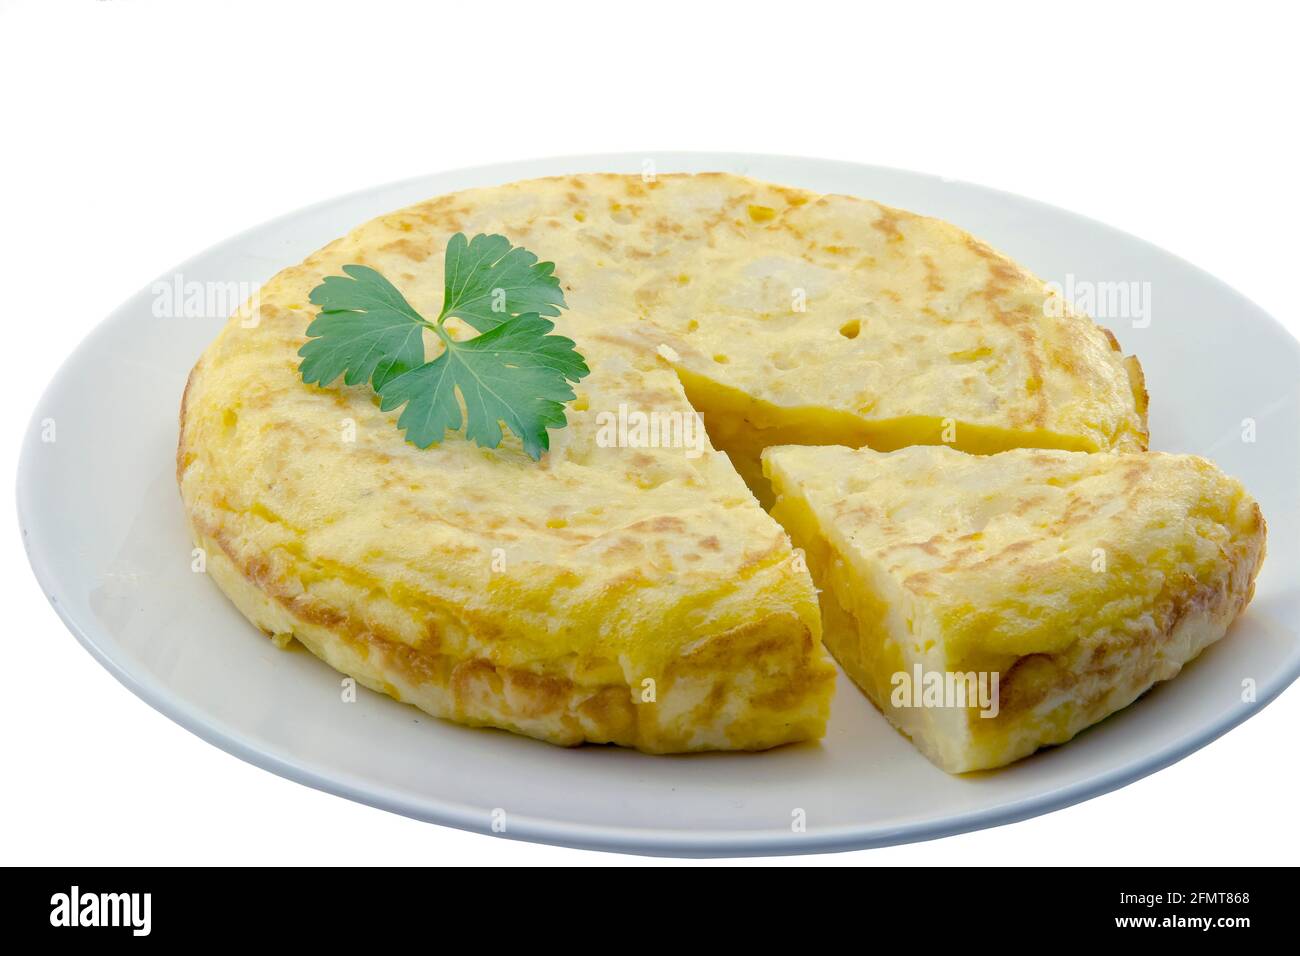 Spanish omelette with potatoes, parsley leaf gift auction, white background Stock Photo